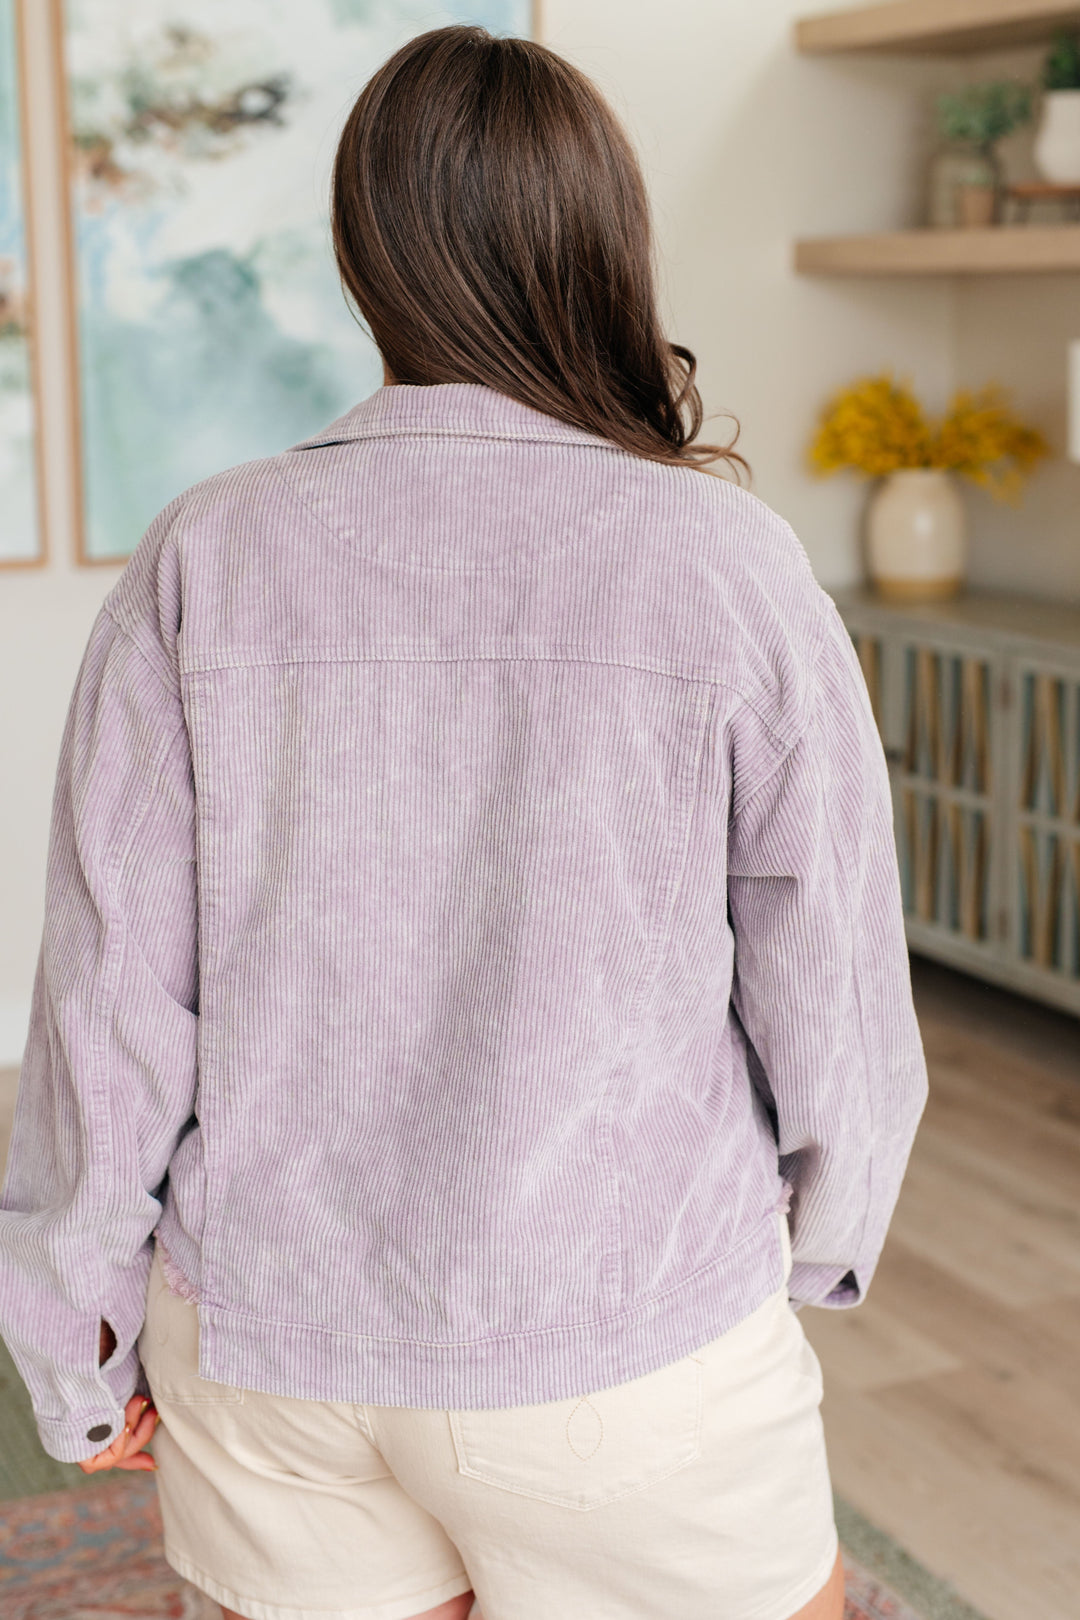 Main Stage Corduroy Jacket in Lavender-Outerwear-Inspired by Justeen-Women's Clothing Boutique in Chicago, Illinois